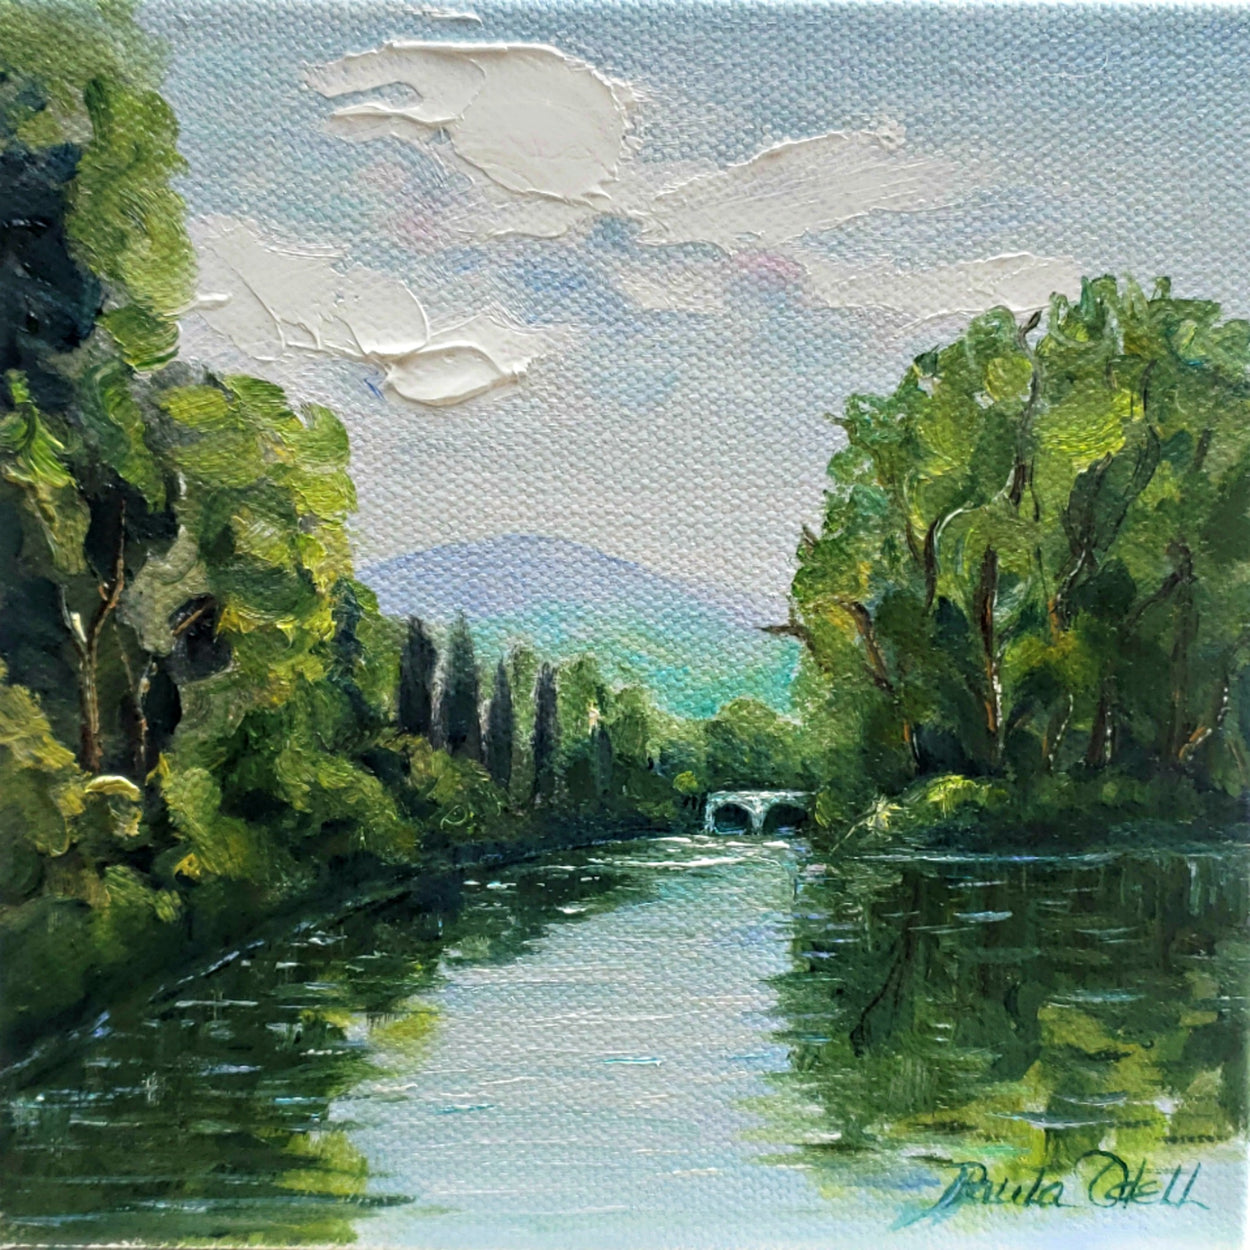 beautiful river with bridge, peaceful with greenery and trees gives you a floating down the river feeling. Puffy white clouds blue sky Original oil on canvas 6x6